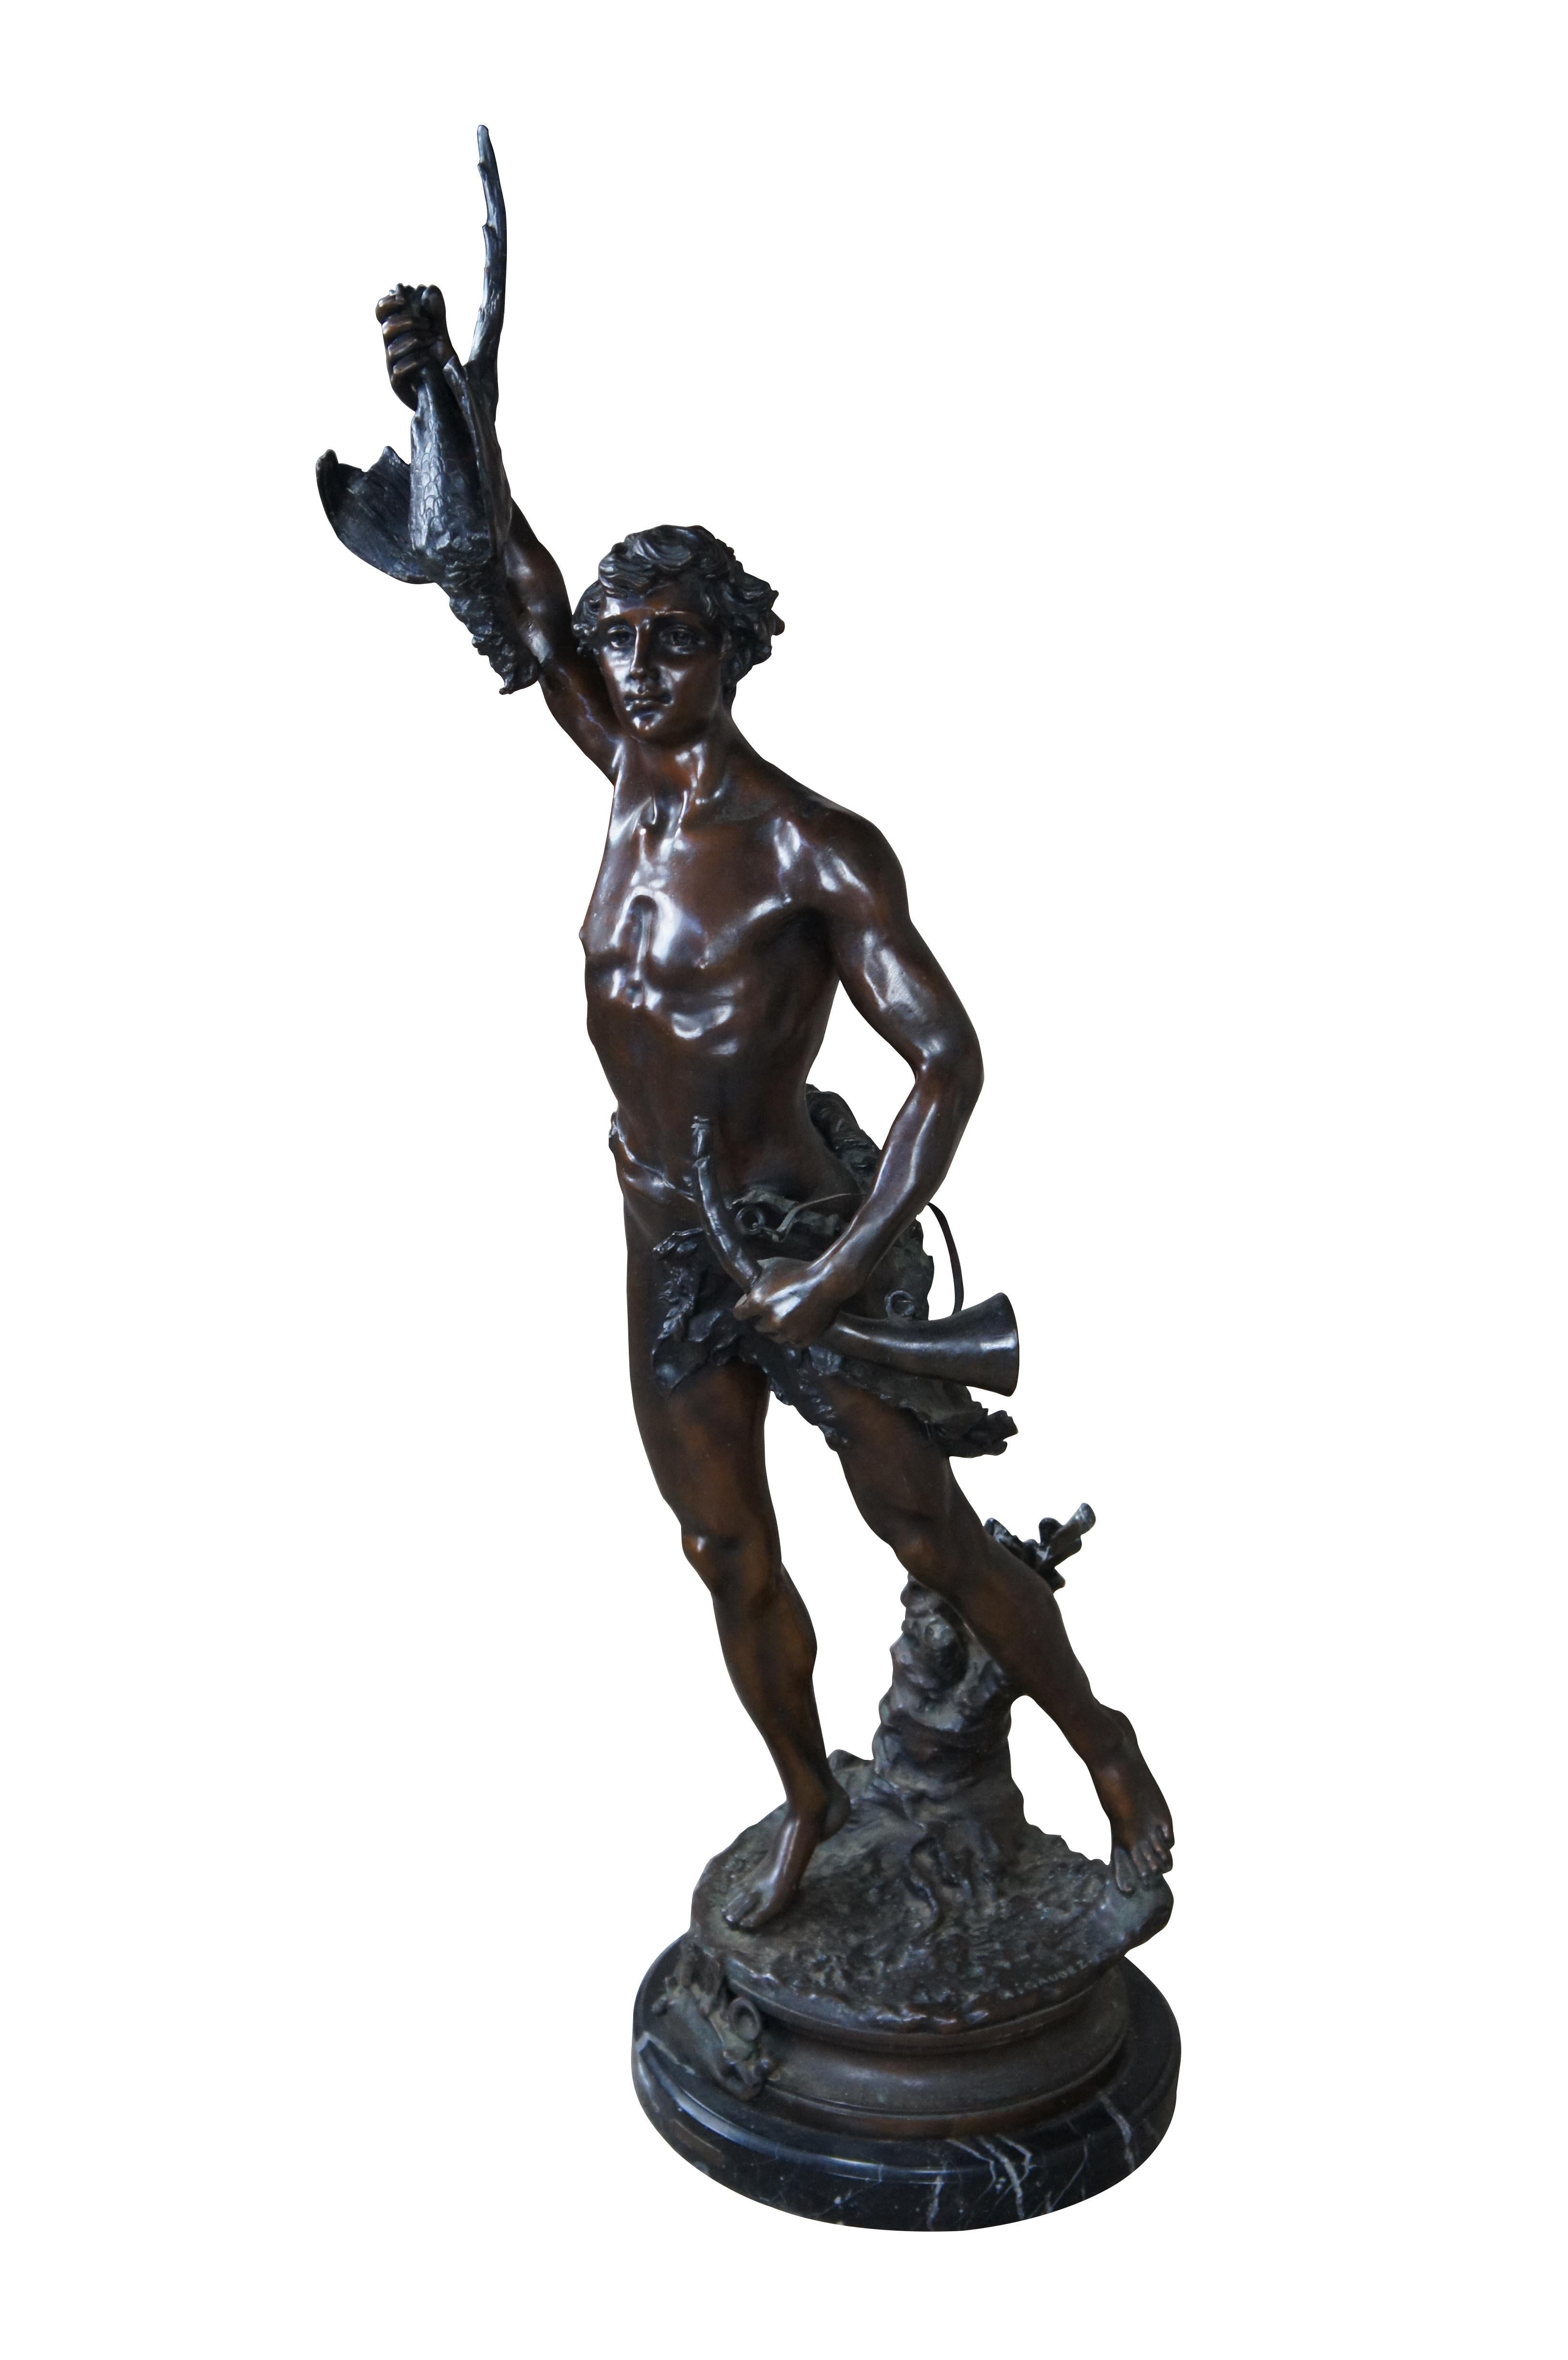 A remarkable French Bronze sculpture of Acteon by Adrein Etienne Gaudez. The statue is sculpted in lifelike detail, featuring Acteon with a bird in his outstretched arm, standing on one leg with a French horn in his other arm. Includes a neat